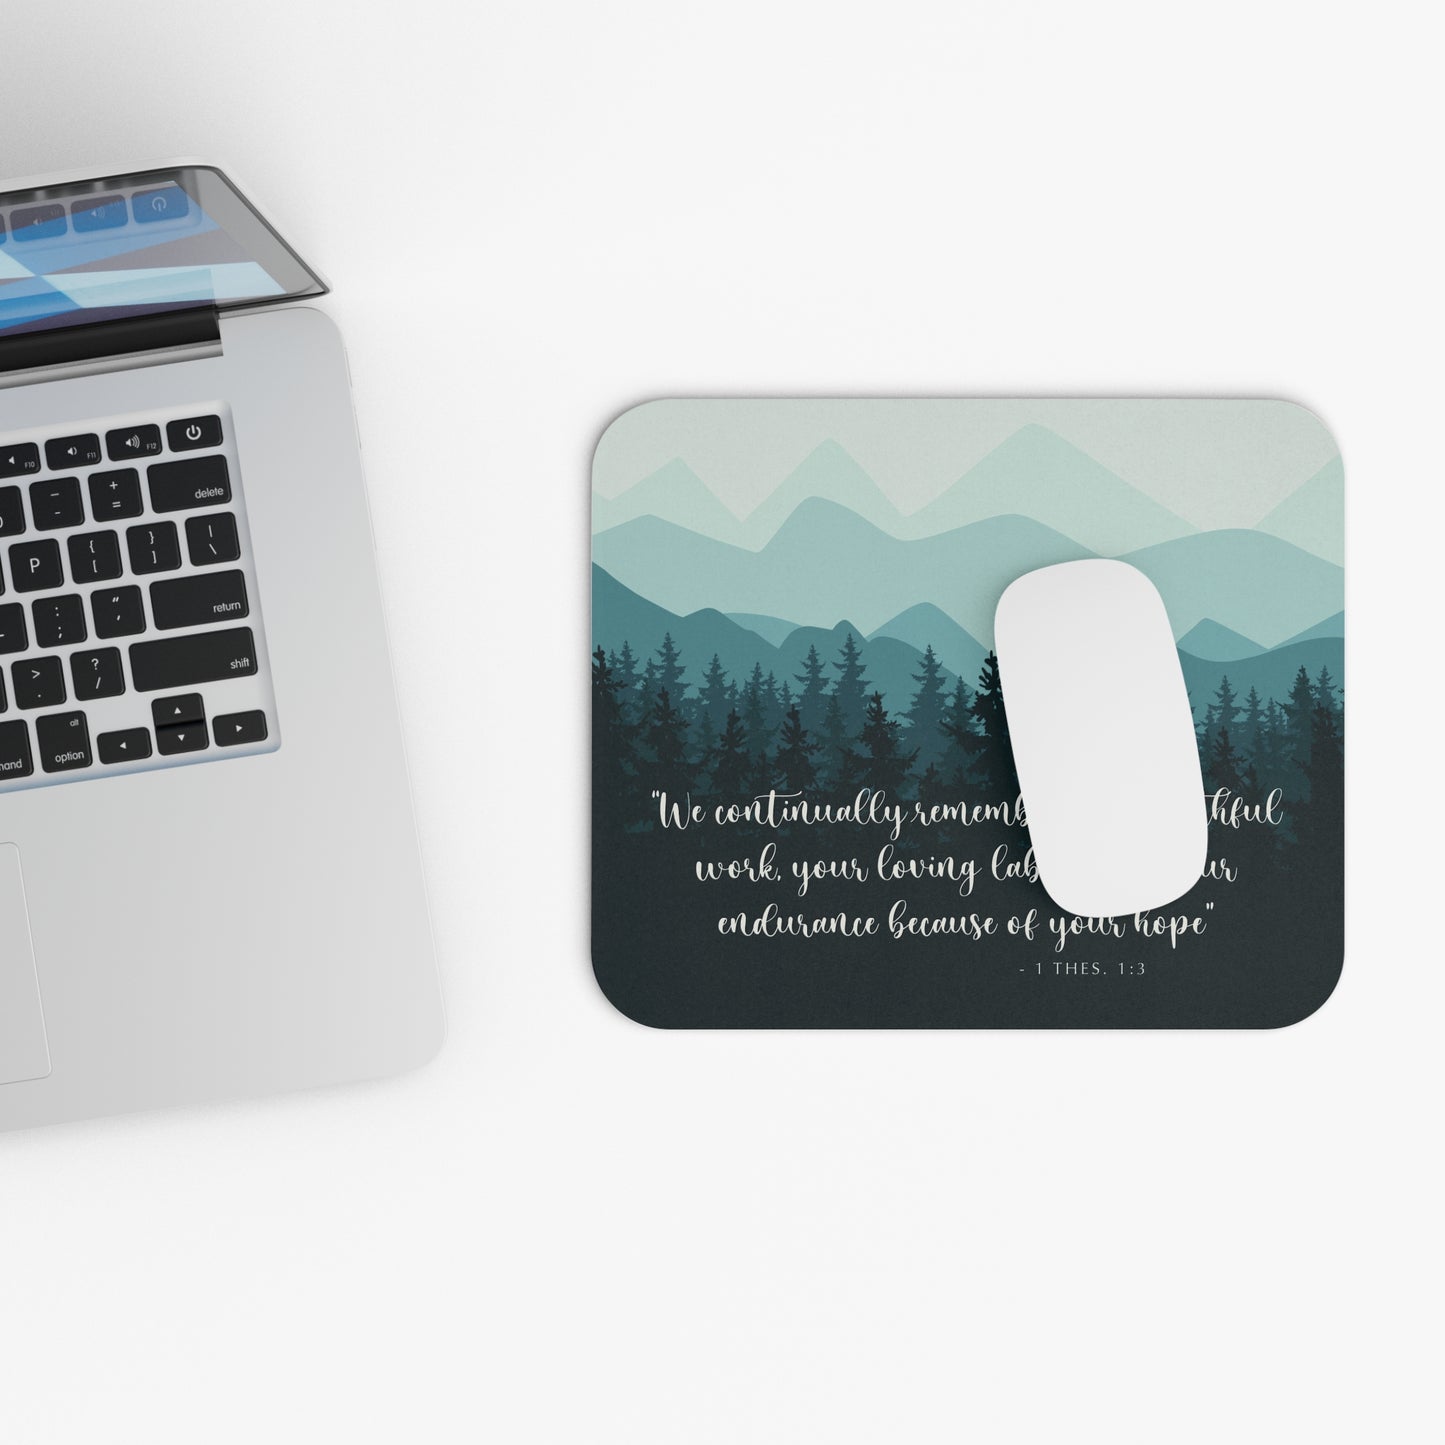 1 Thessalonians 1:3 Mouse Pad “We Continually Remember Your Faithful Work”